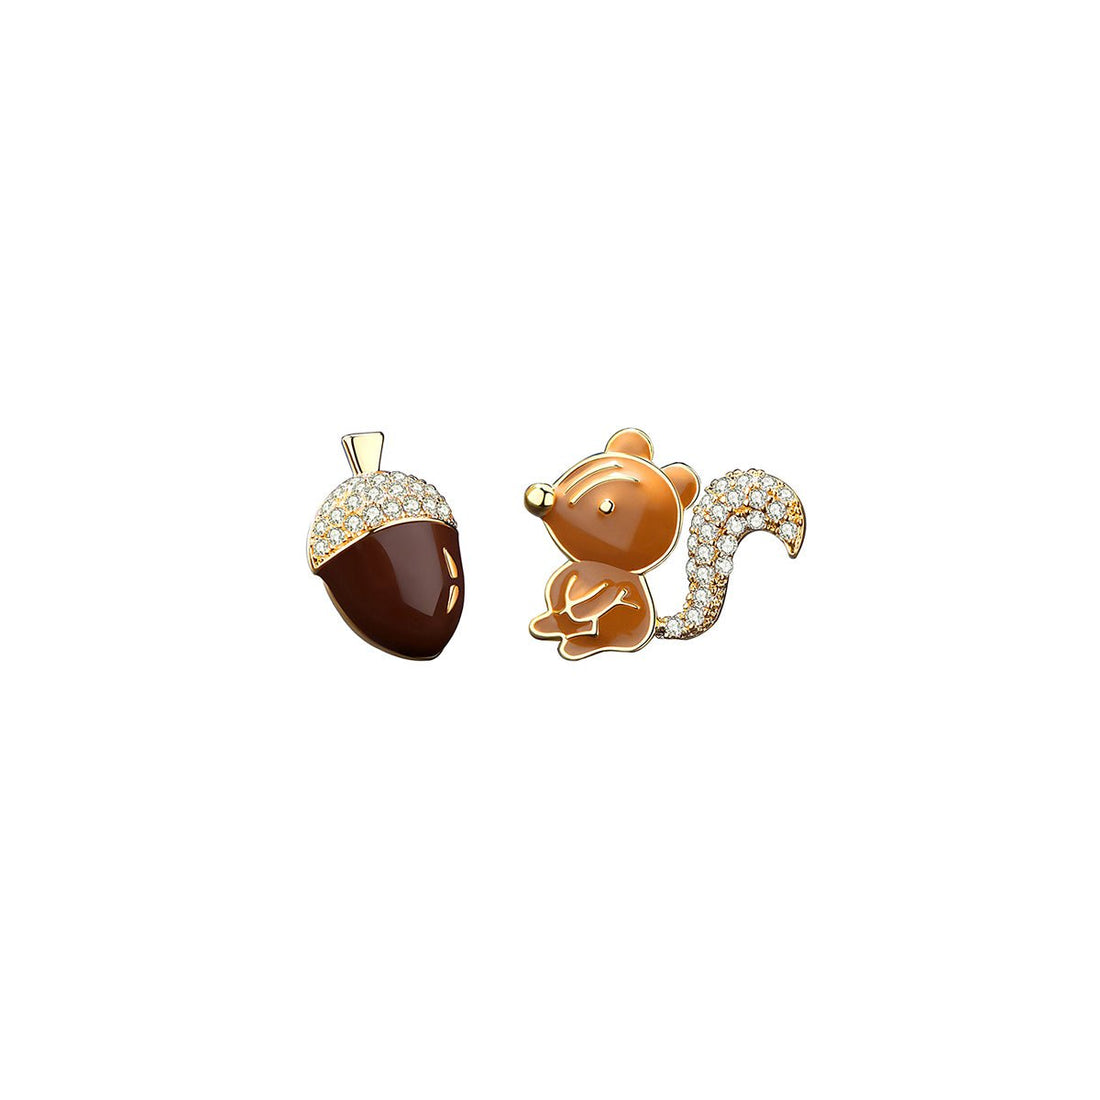 Squirrel Pinecone Gold Earrings - 0cm